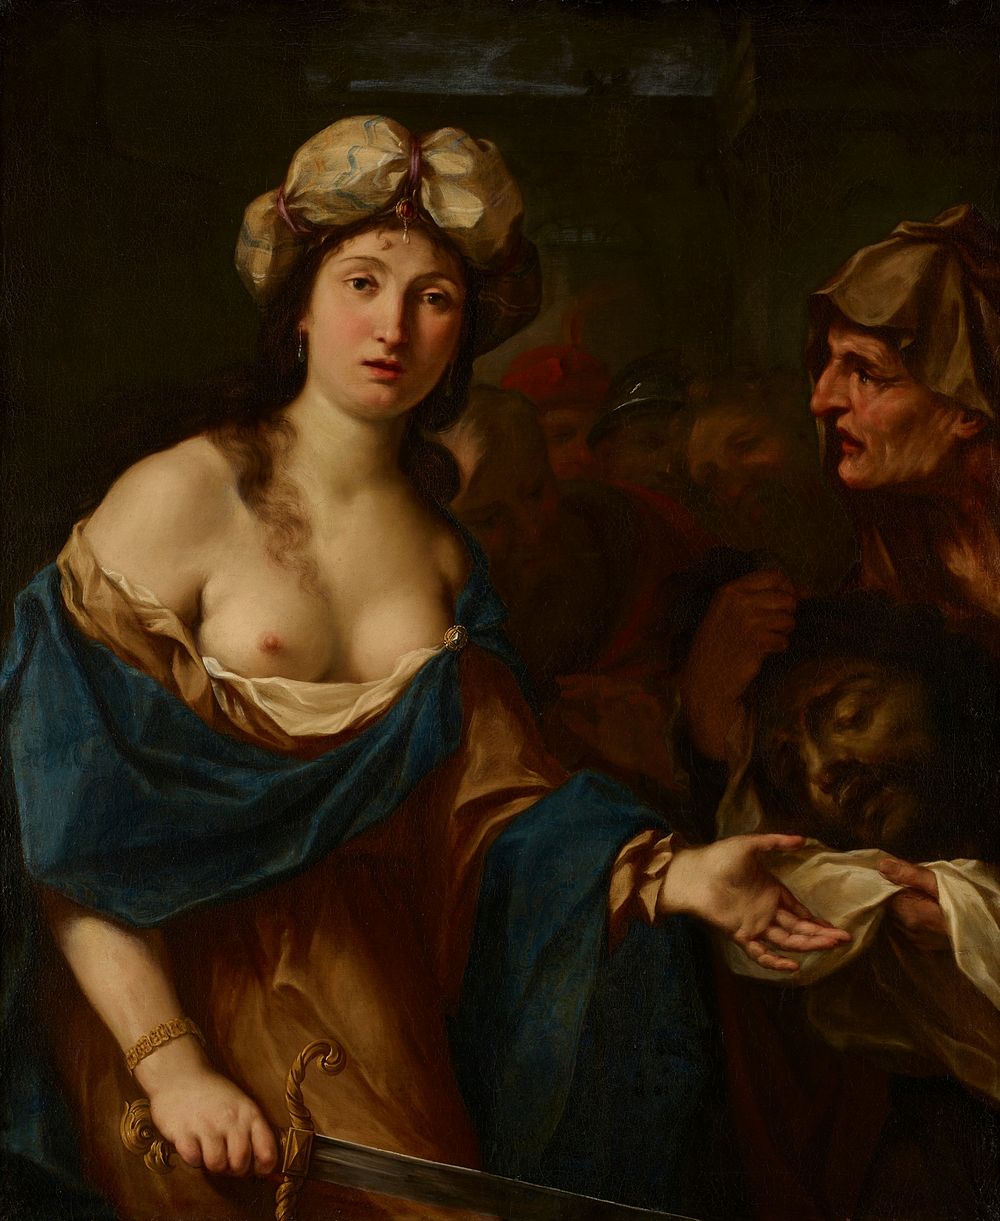 Judith with Head of Holofernes. Original from the Minneapolis Institute of Art.